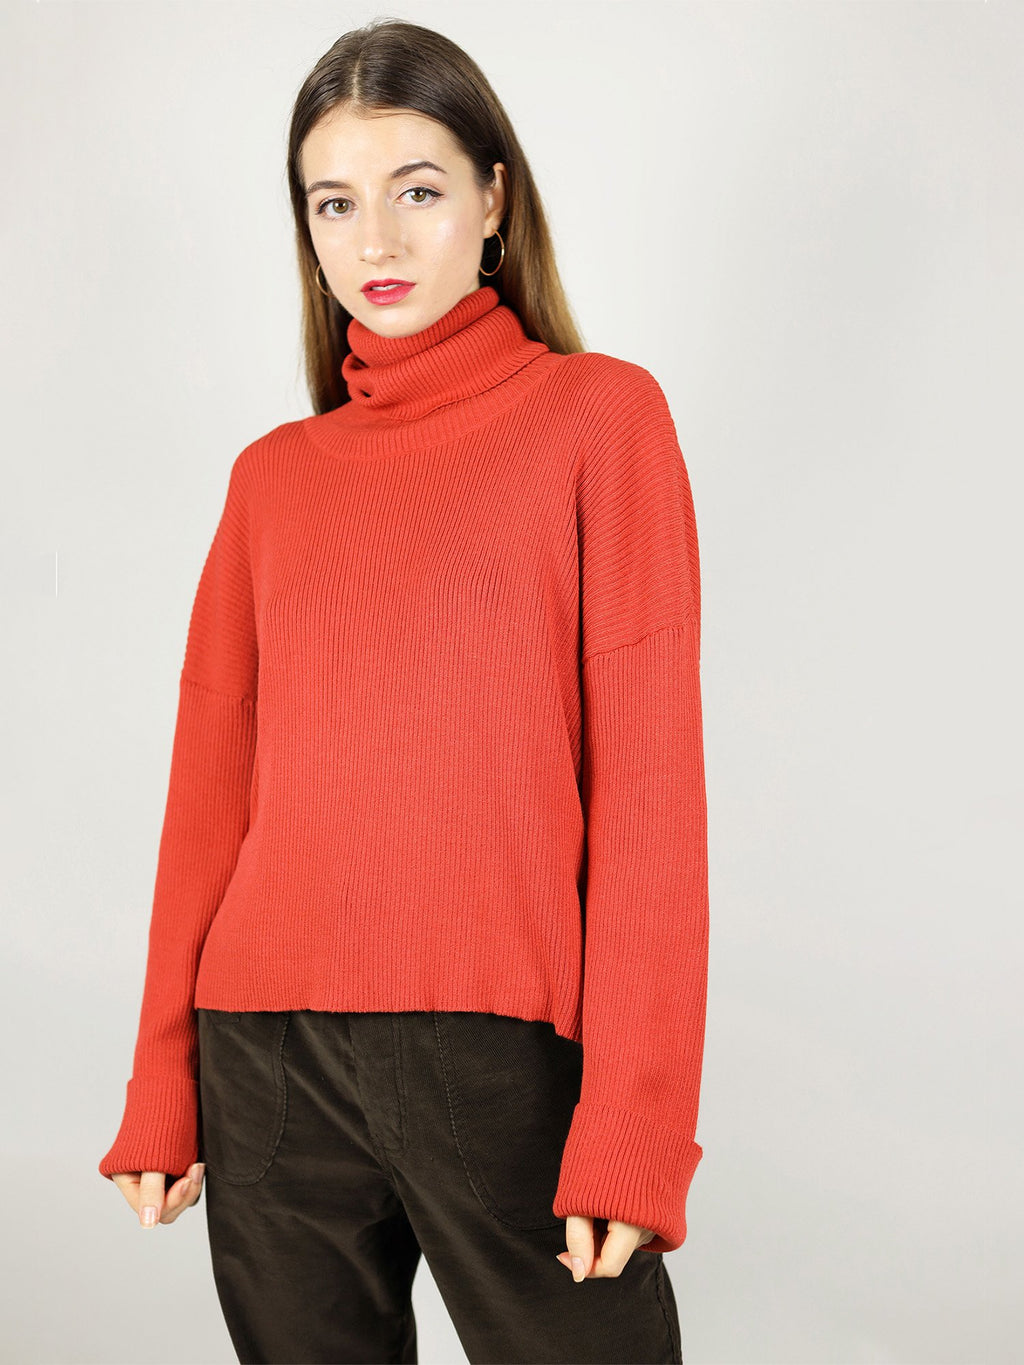 Made from 100% organic cotton, the red turteneck is very comfortable with loose fit. Some add ons include extra long roll neck pull over and long sleeves. 